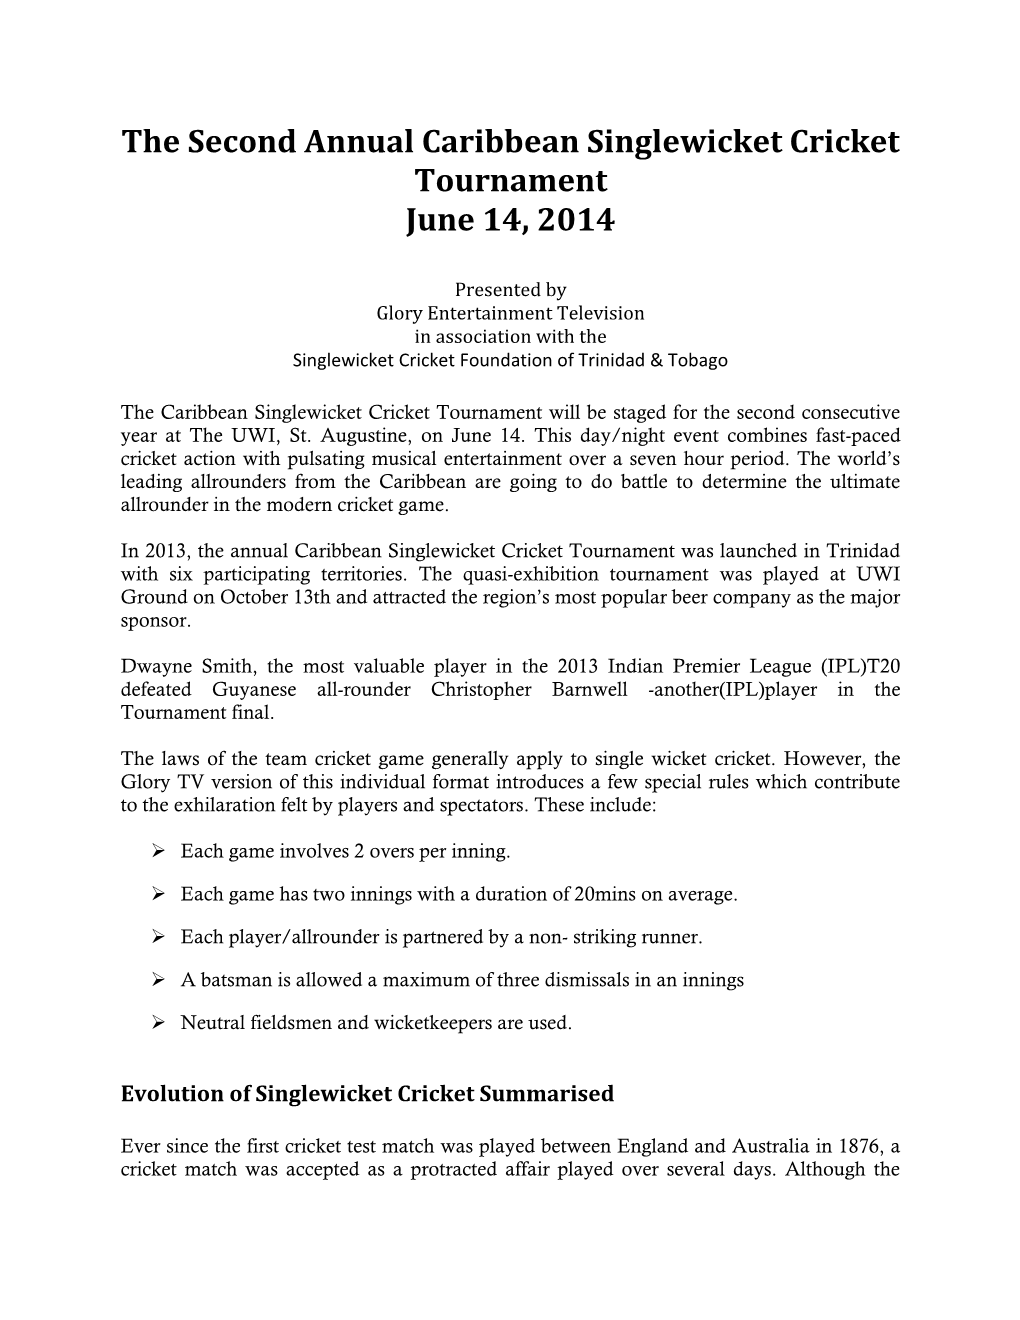 The Second Annual Caribbean Singlewicket Cricket Tournament June 14, 2014